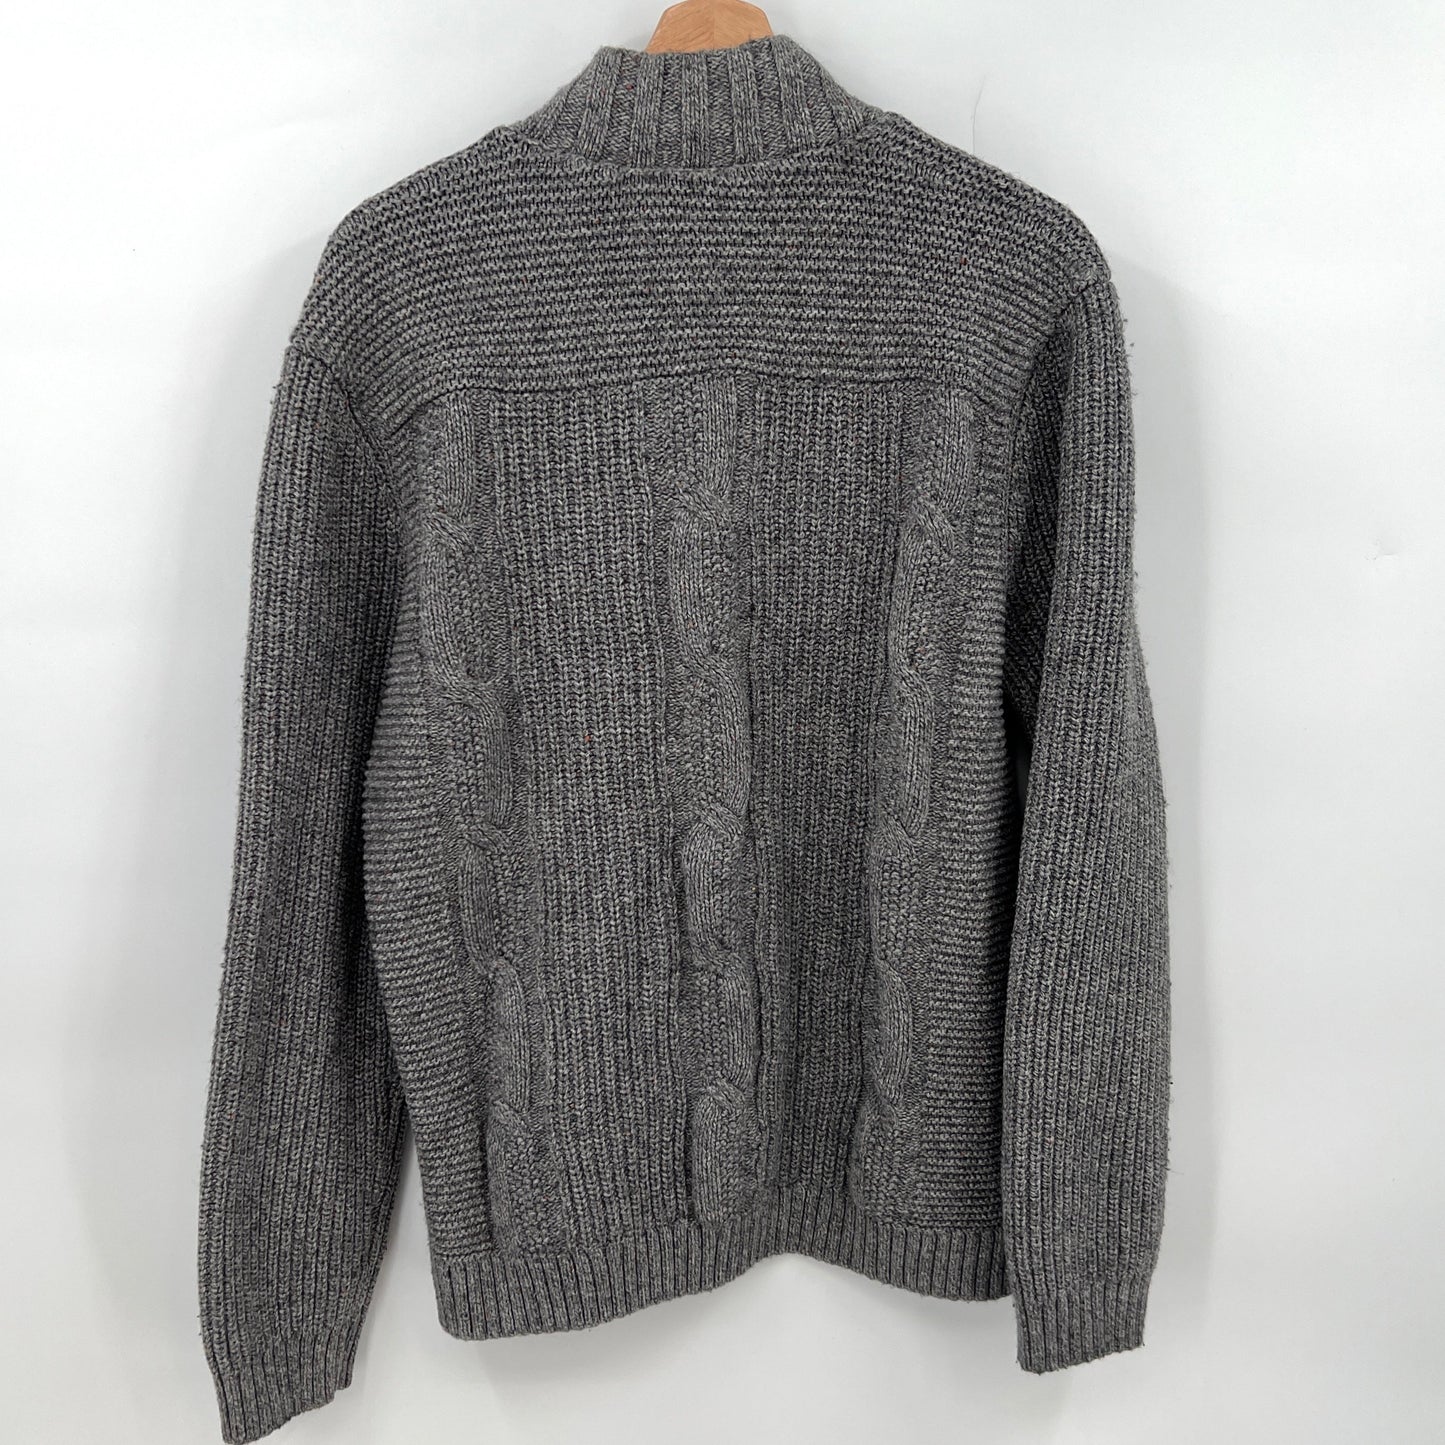 Ted Baker London Cotton Sweater L/XL